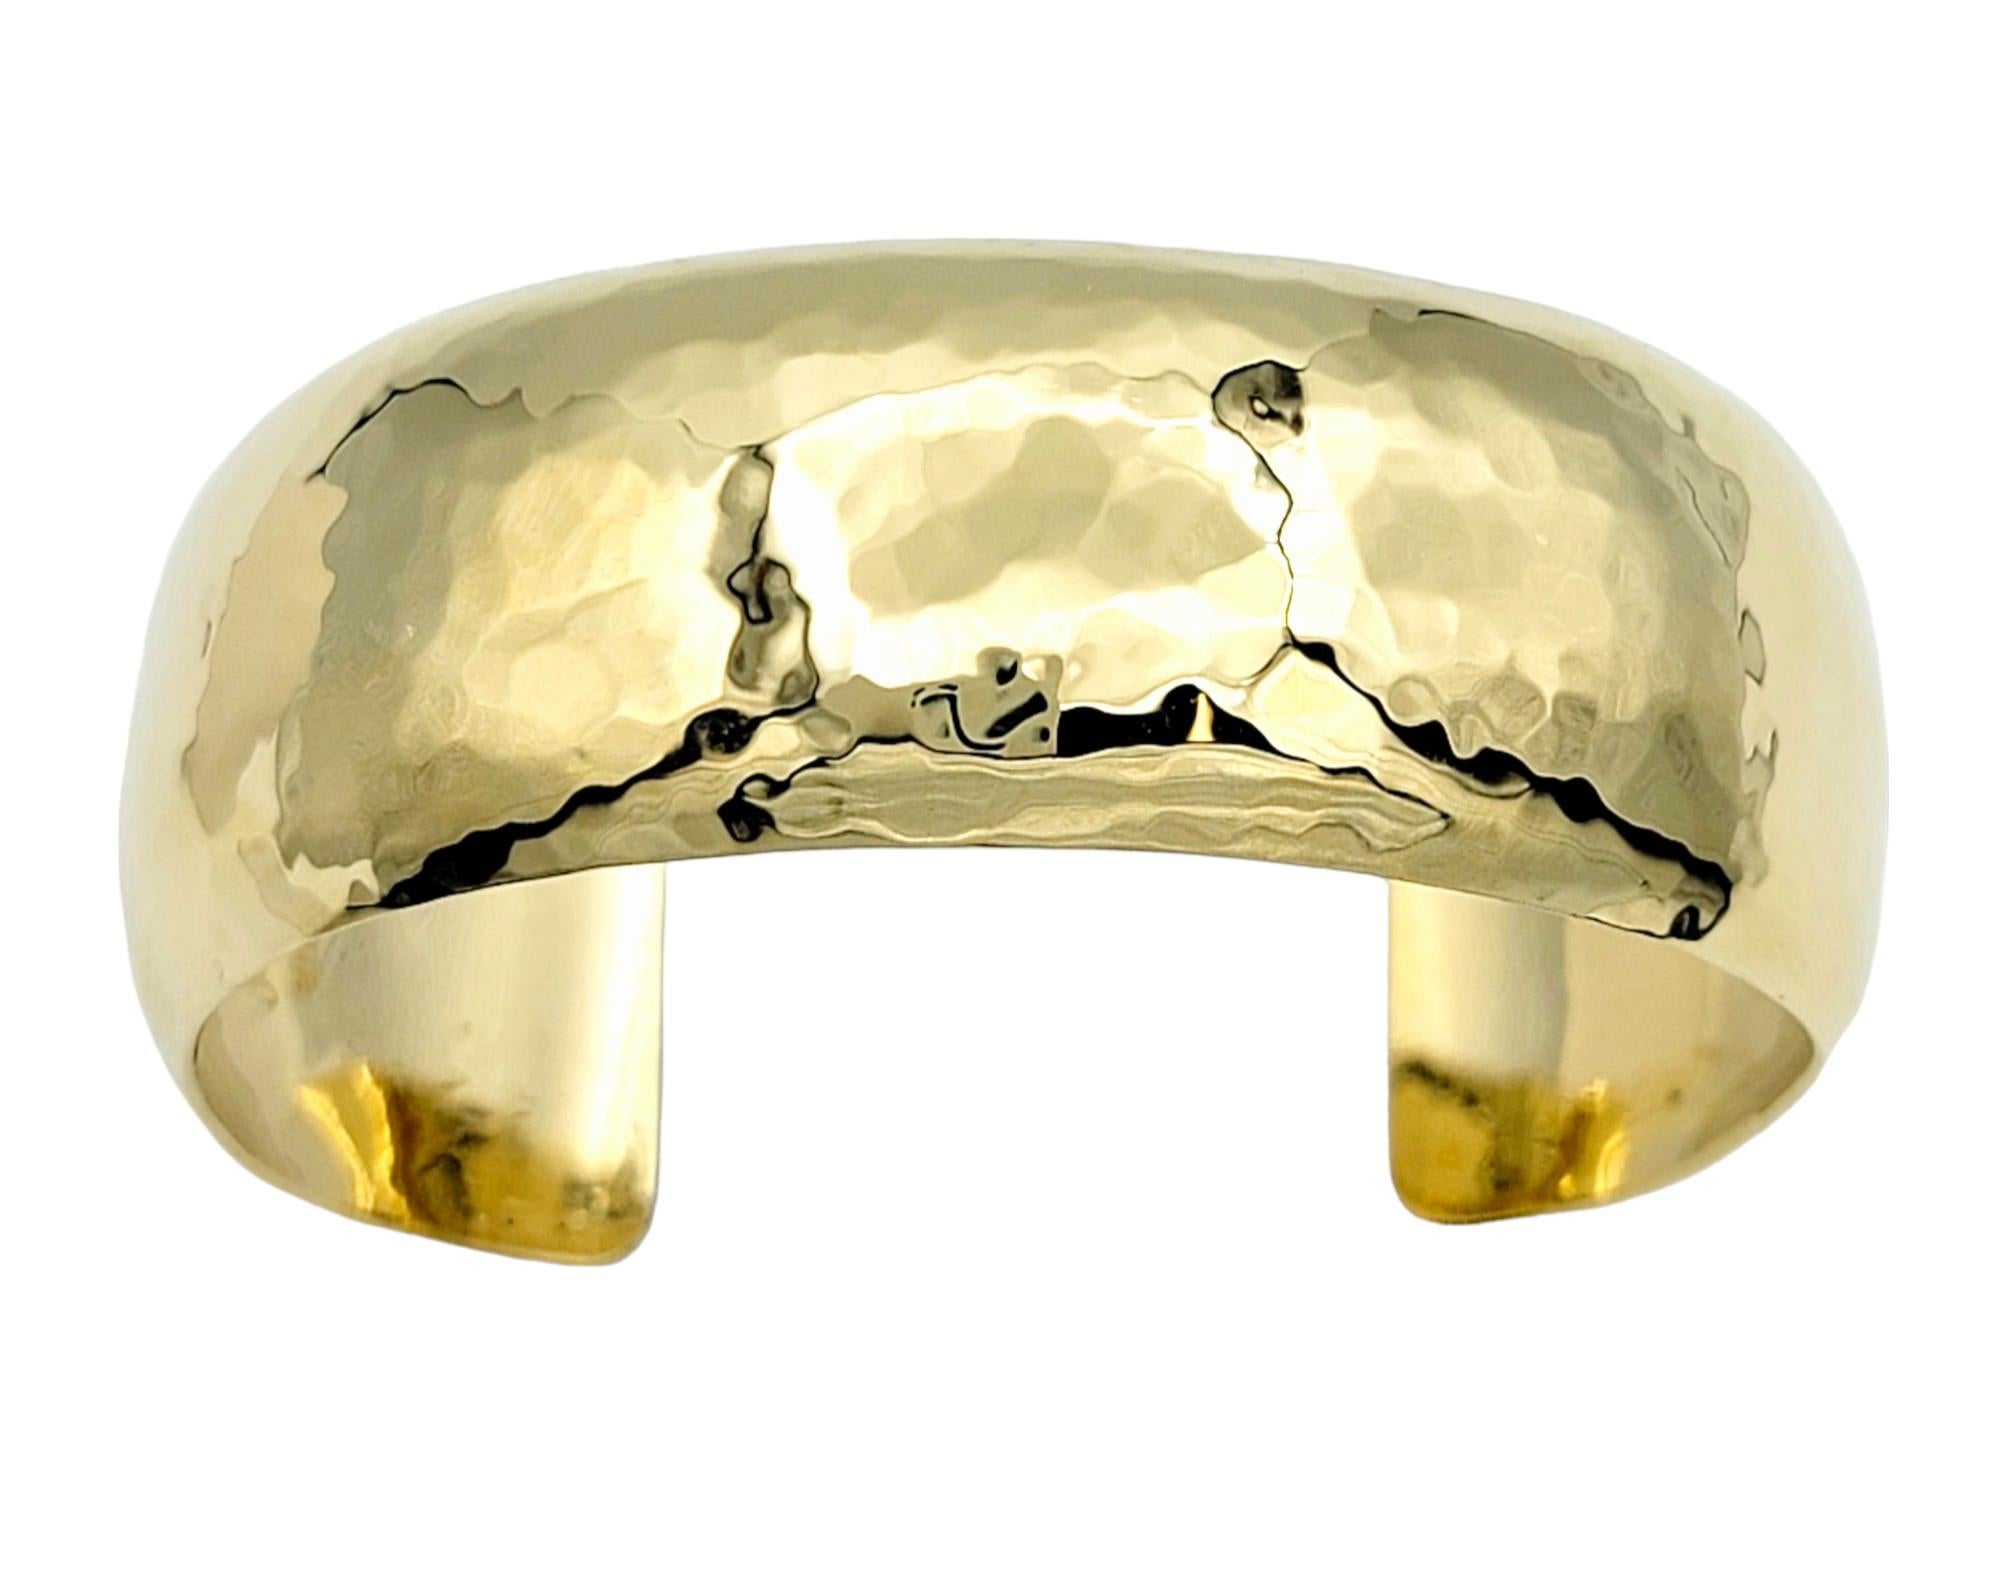 This wide band cuff bracelet, expertly crafted in lustrous 18 karat yellow gold, seamlessly combines versatility with understated elegance. The hammered finish not only adds a touch of textural allure but also contributes to the bracelet's